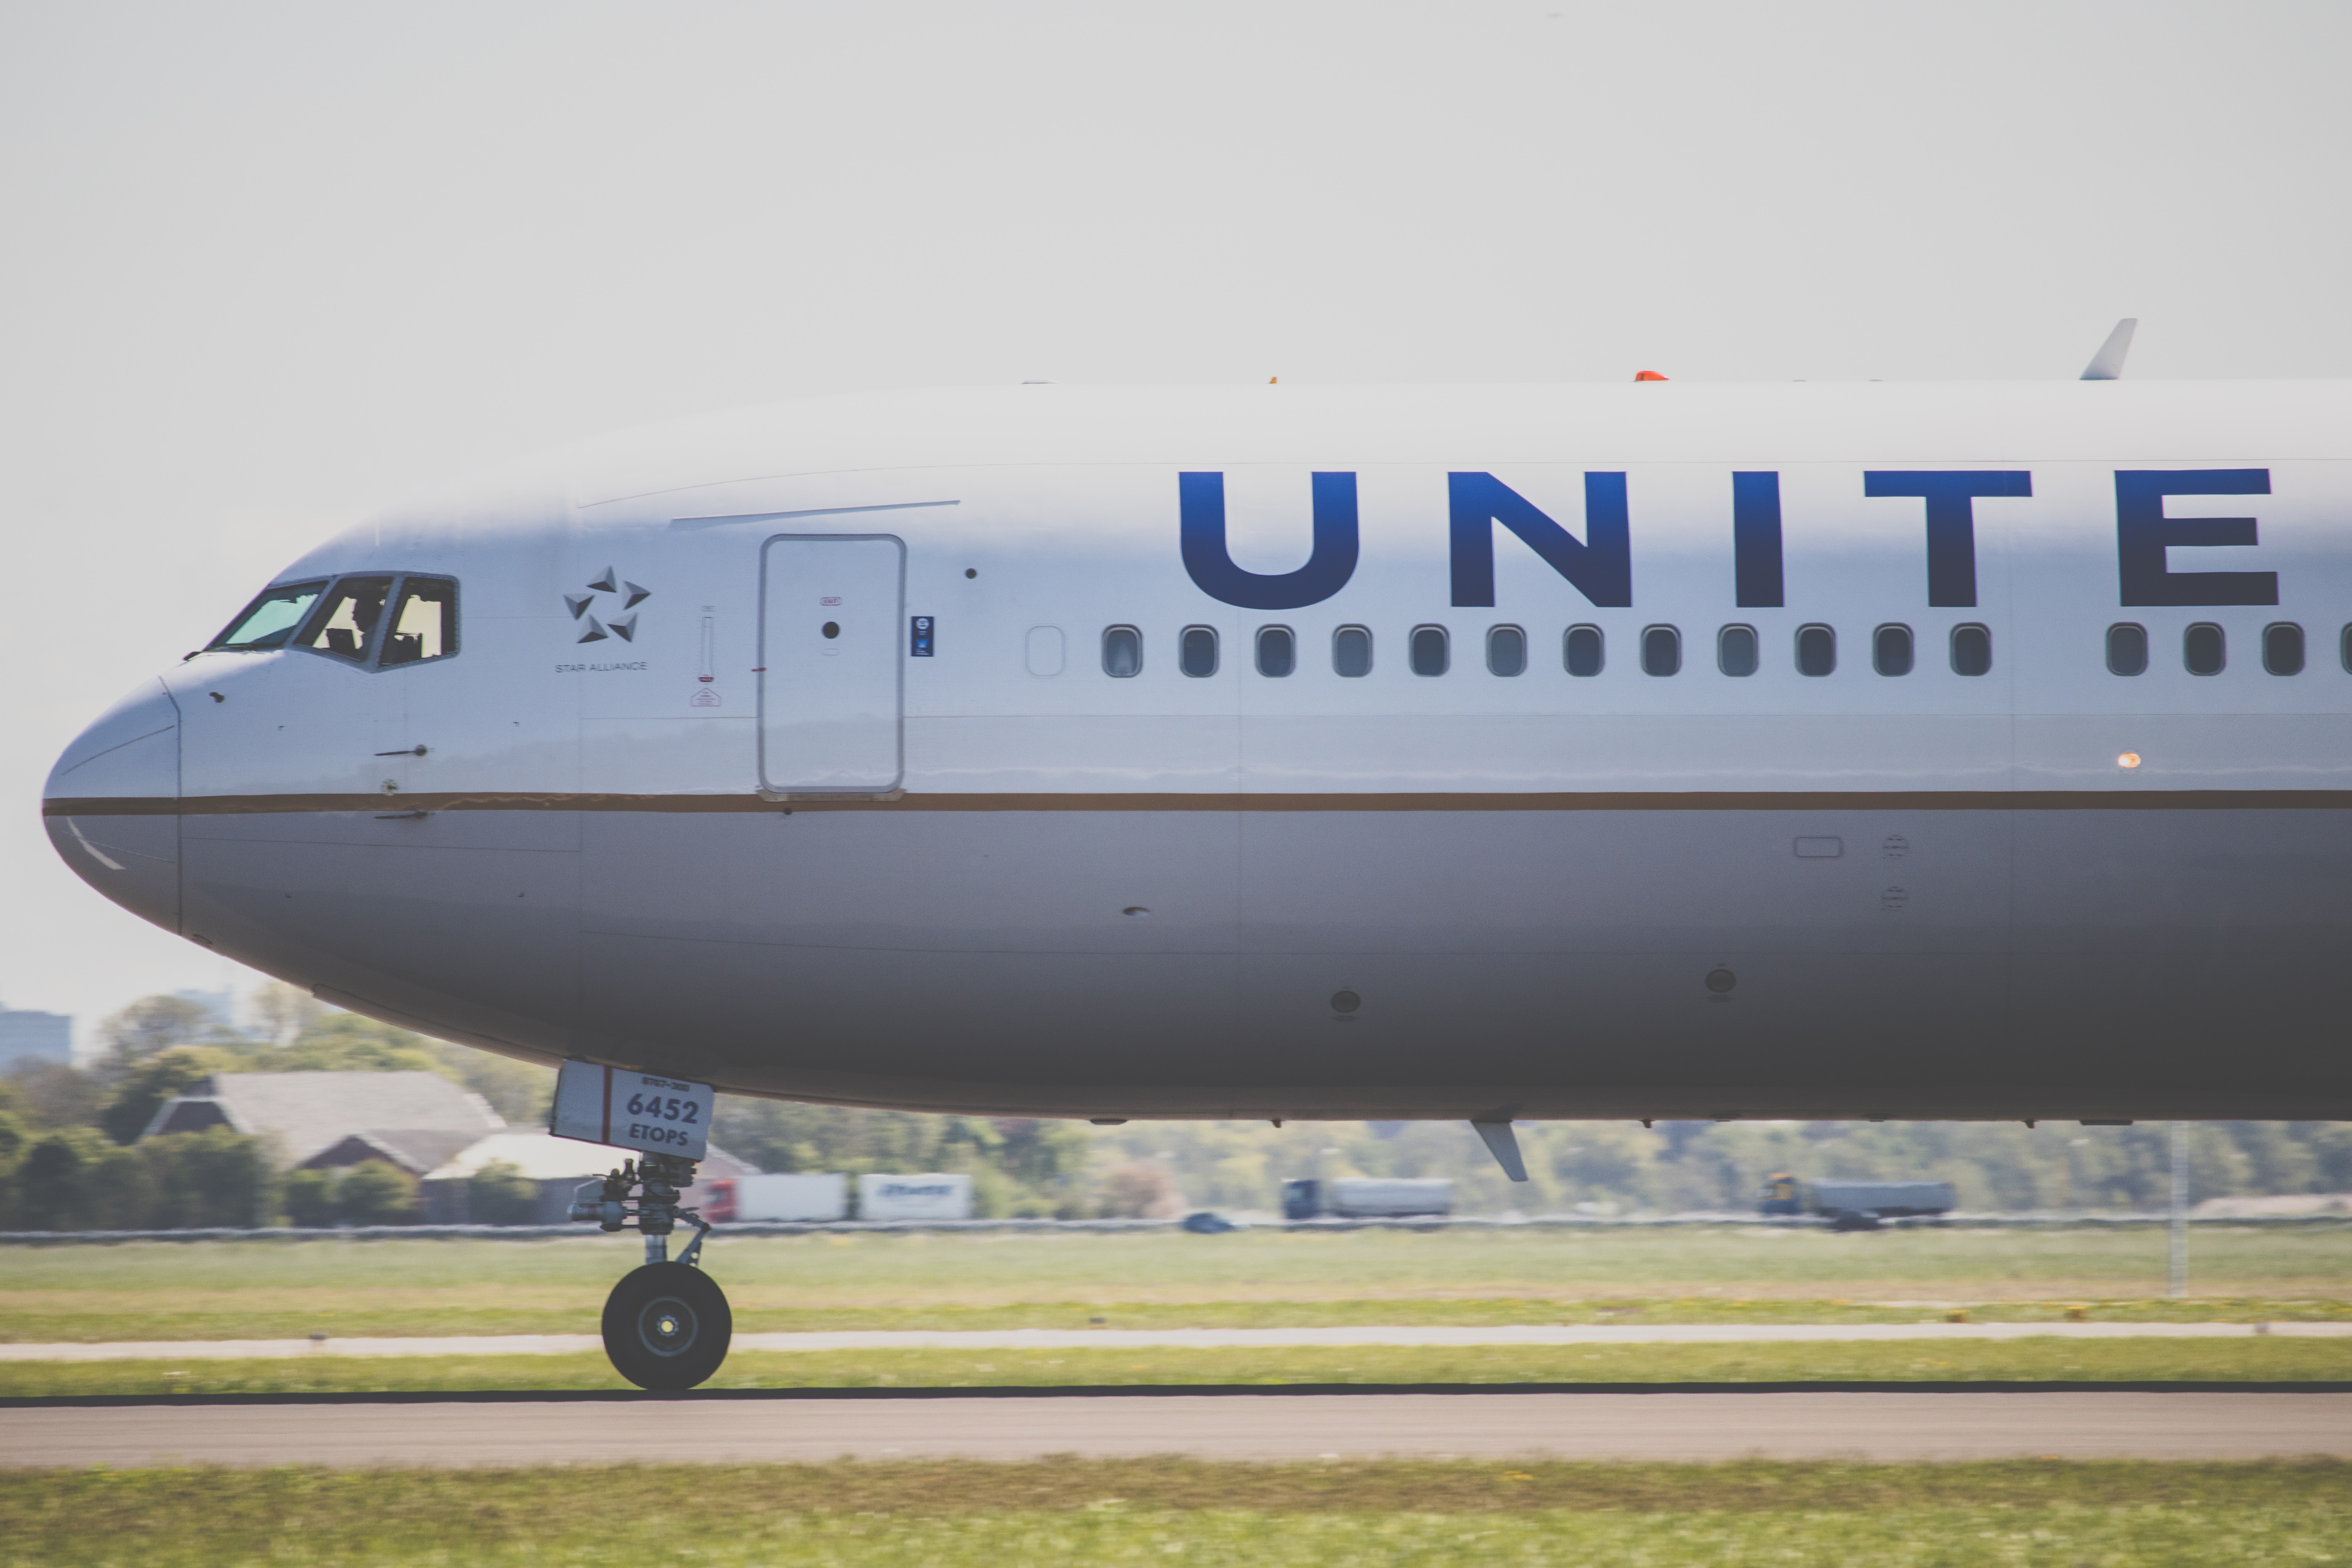 777 United Airlines